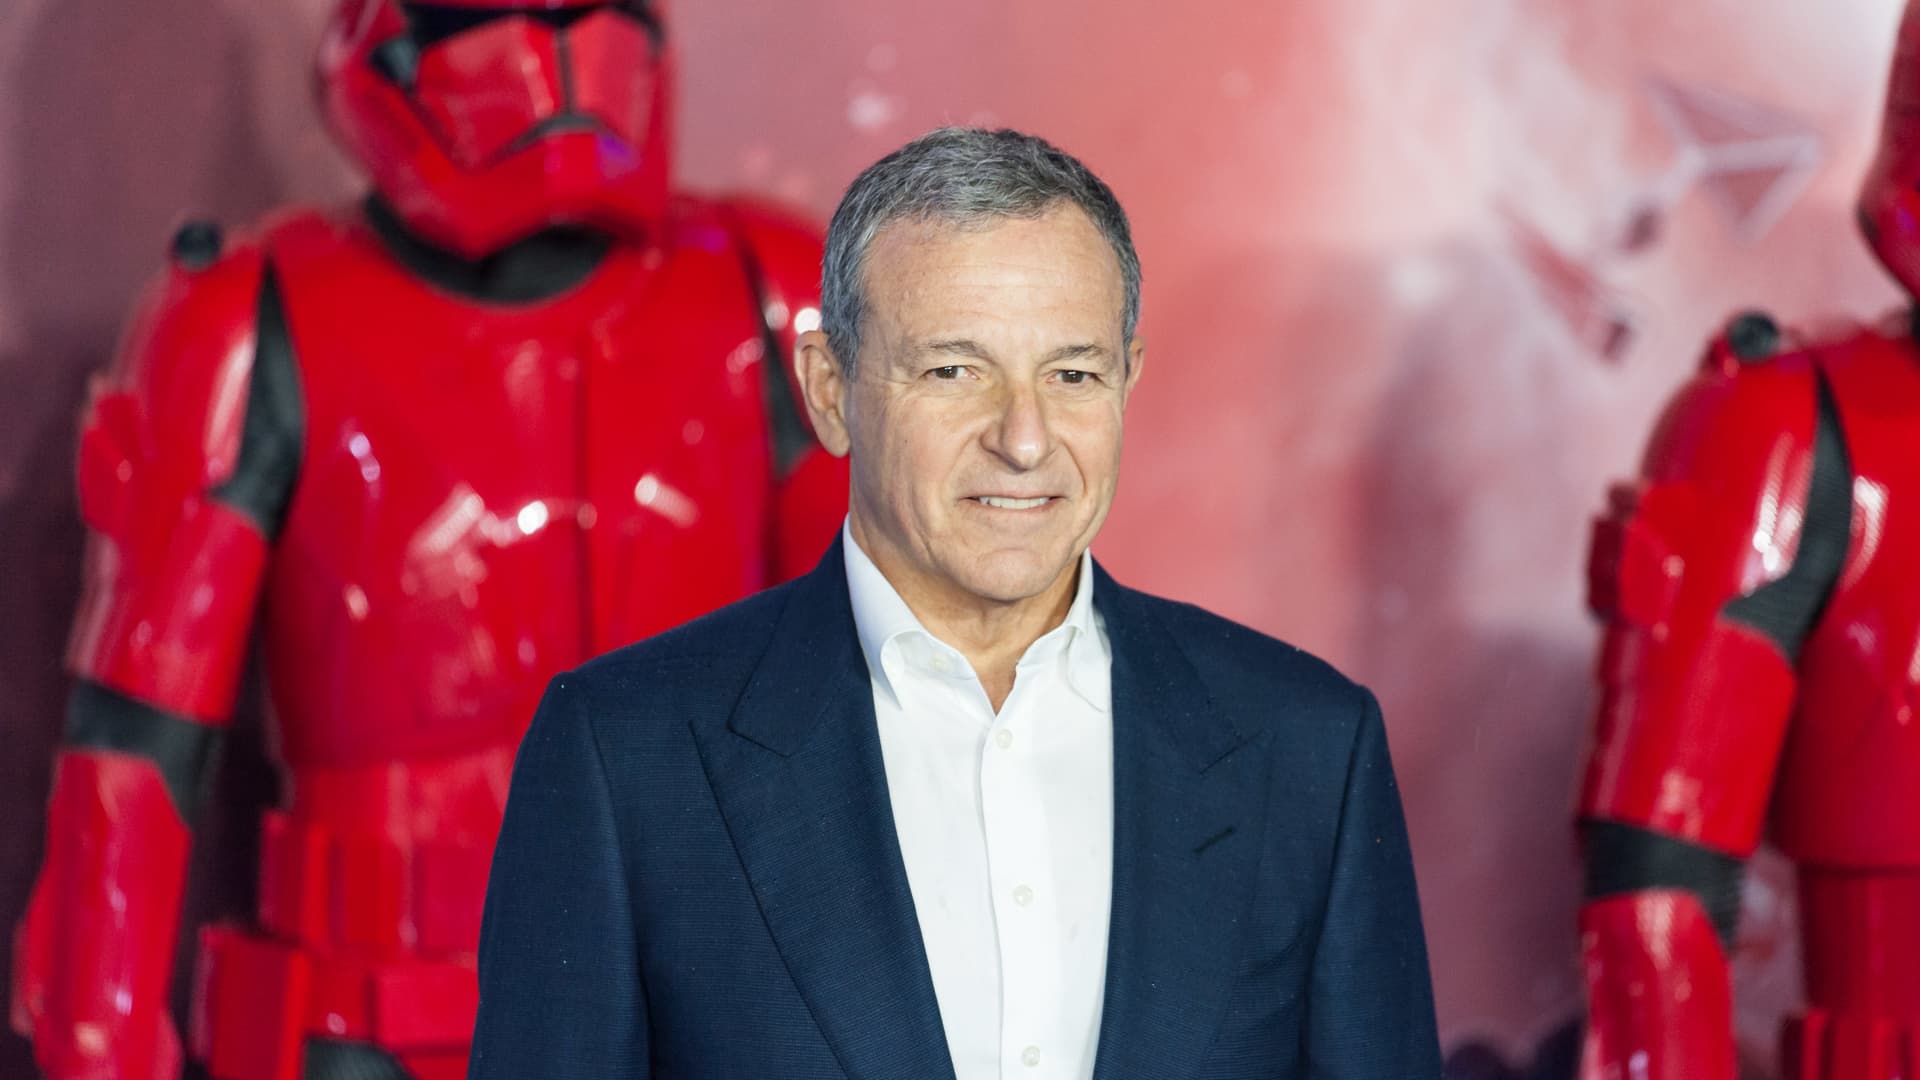 Disney blindsided Chapek with CEO resolution after reaching out to Iger on Friday